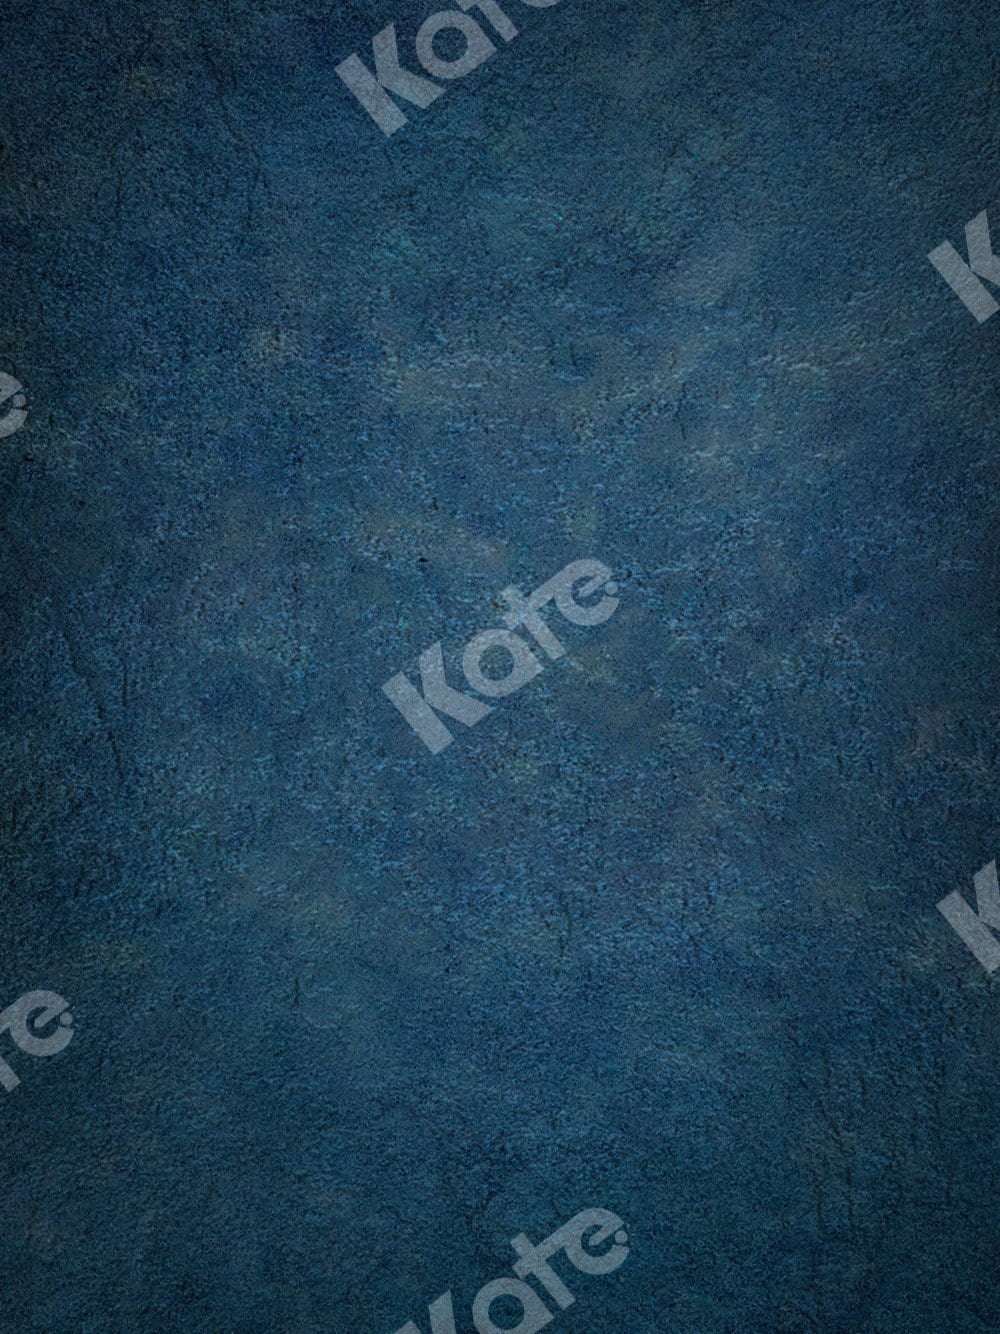 Kate Abstract Backdrop Blue Tuxture Designed by Jia Chan Photography - Kate Backdrop